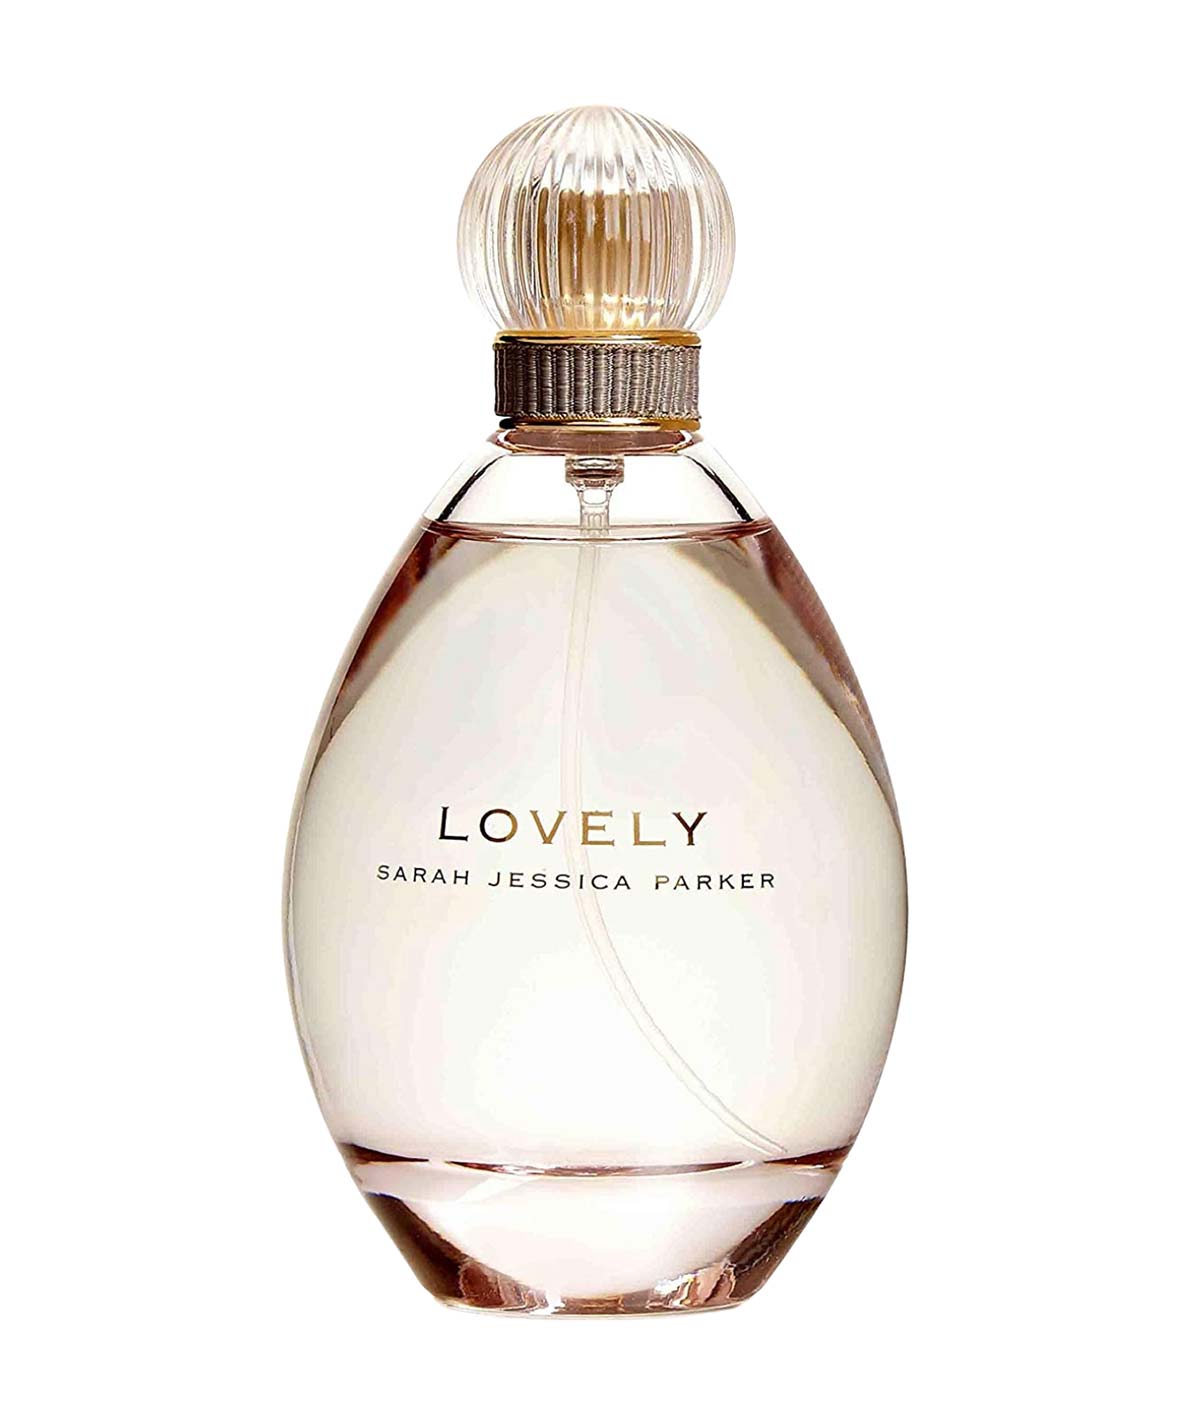 Best Perfume For Mom (A Buying Guide With Ideas) - FragranceReview.com